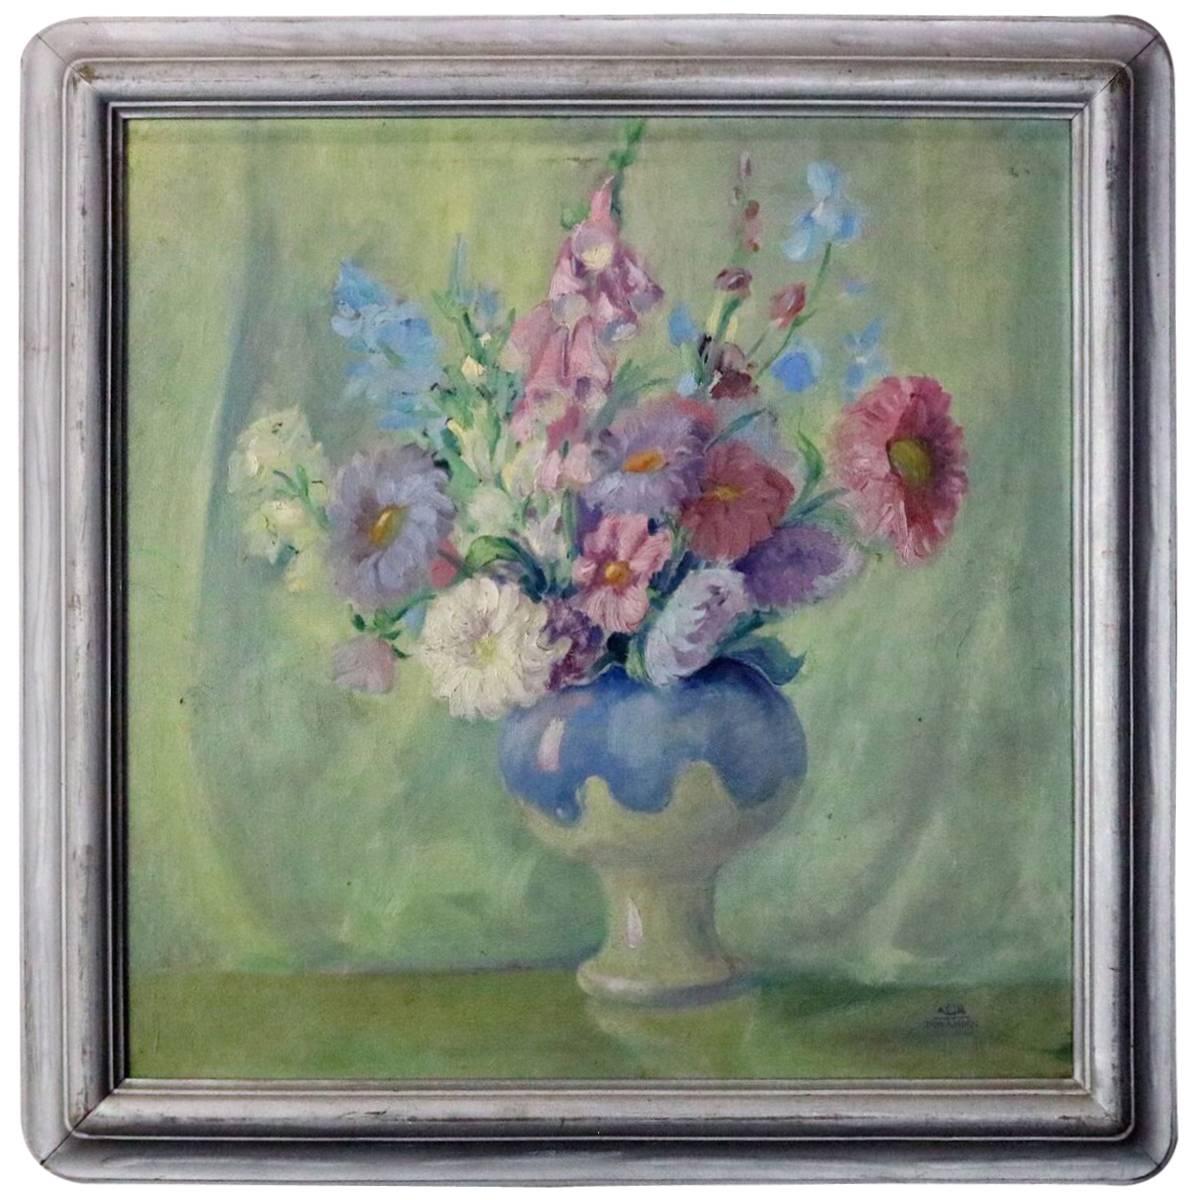 Antique Arts & Crafts Style Still Floral Still Life Oil on Canvas by Don A. Horn